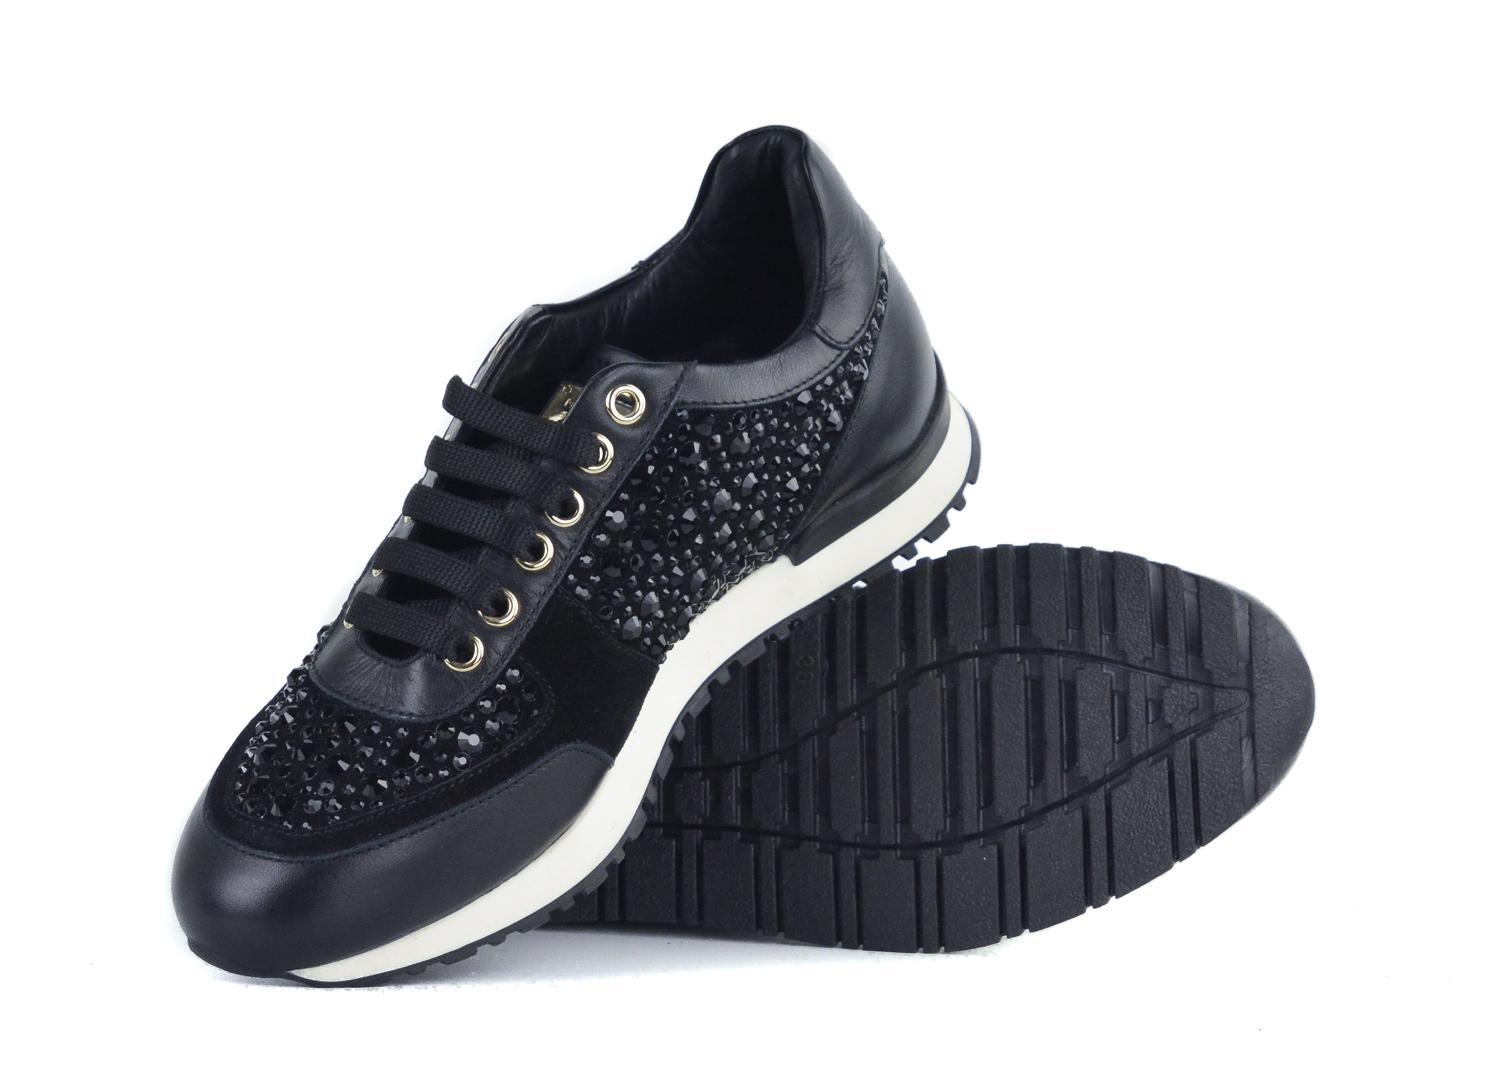 Philip Plein black go home sneakers. These sneakers feature black crystal embellishments throughout on a black leather and suede textile. Perfect shoe for a burst of femininity and chicness on the streets.

Compositiion Leather
Round toe
Lace up